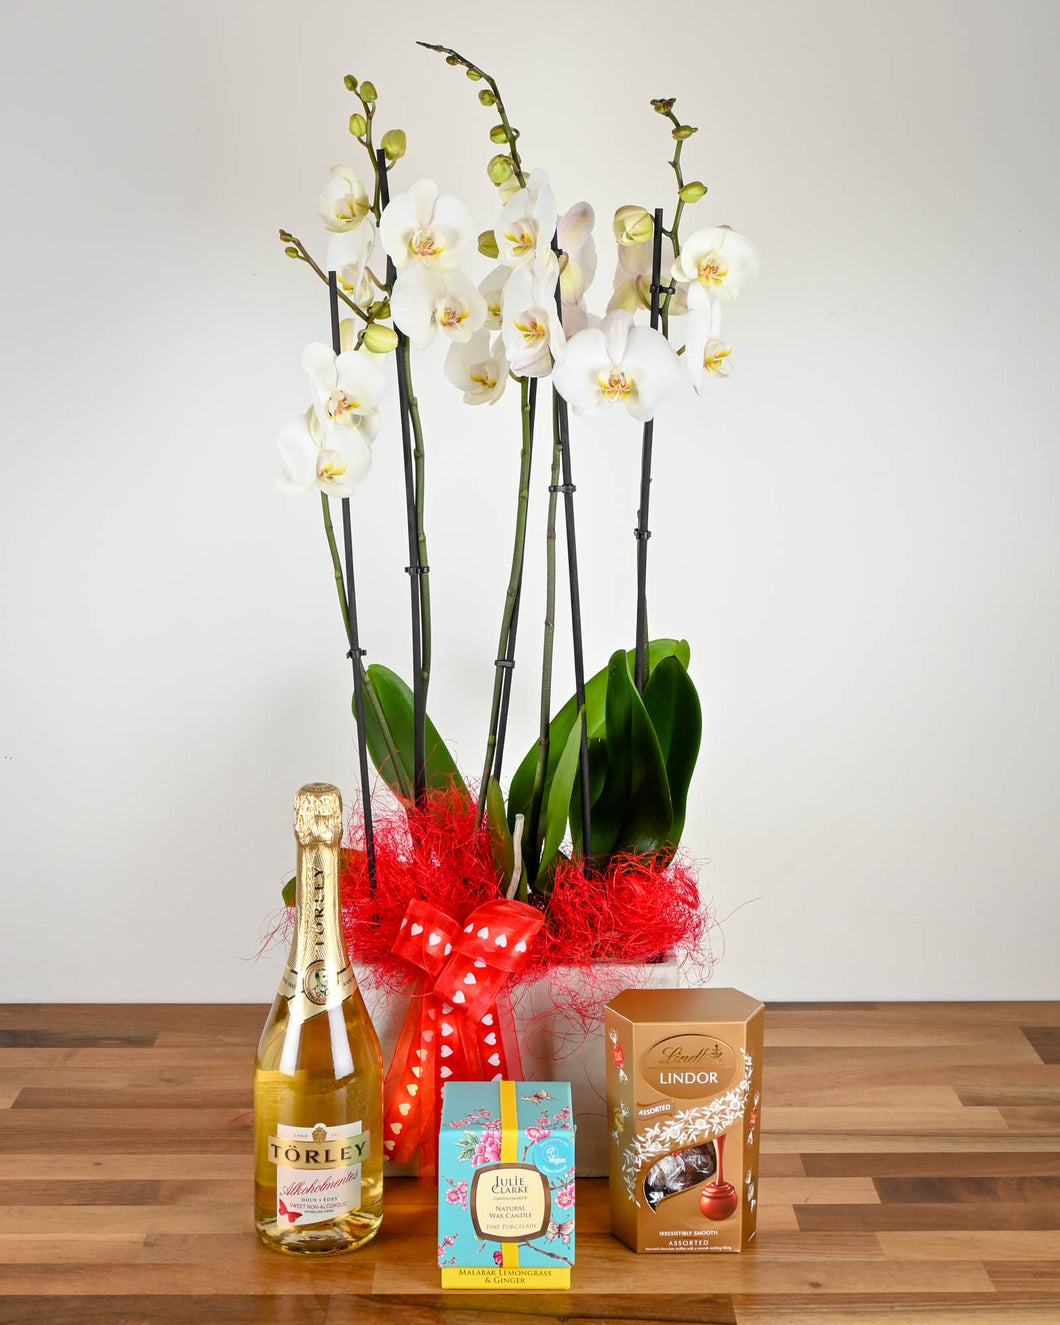 Orchid Gift Deluxe - Orchid Plants, a Julie Clarke Candle, Lindt Chocolate & Non-Alcoholic Fizz